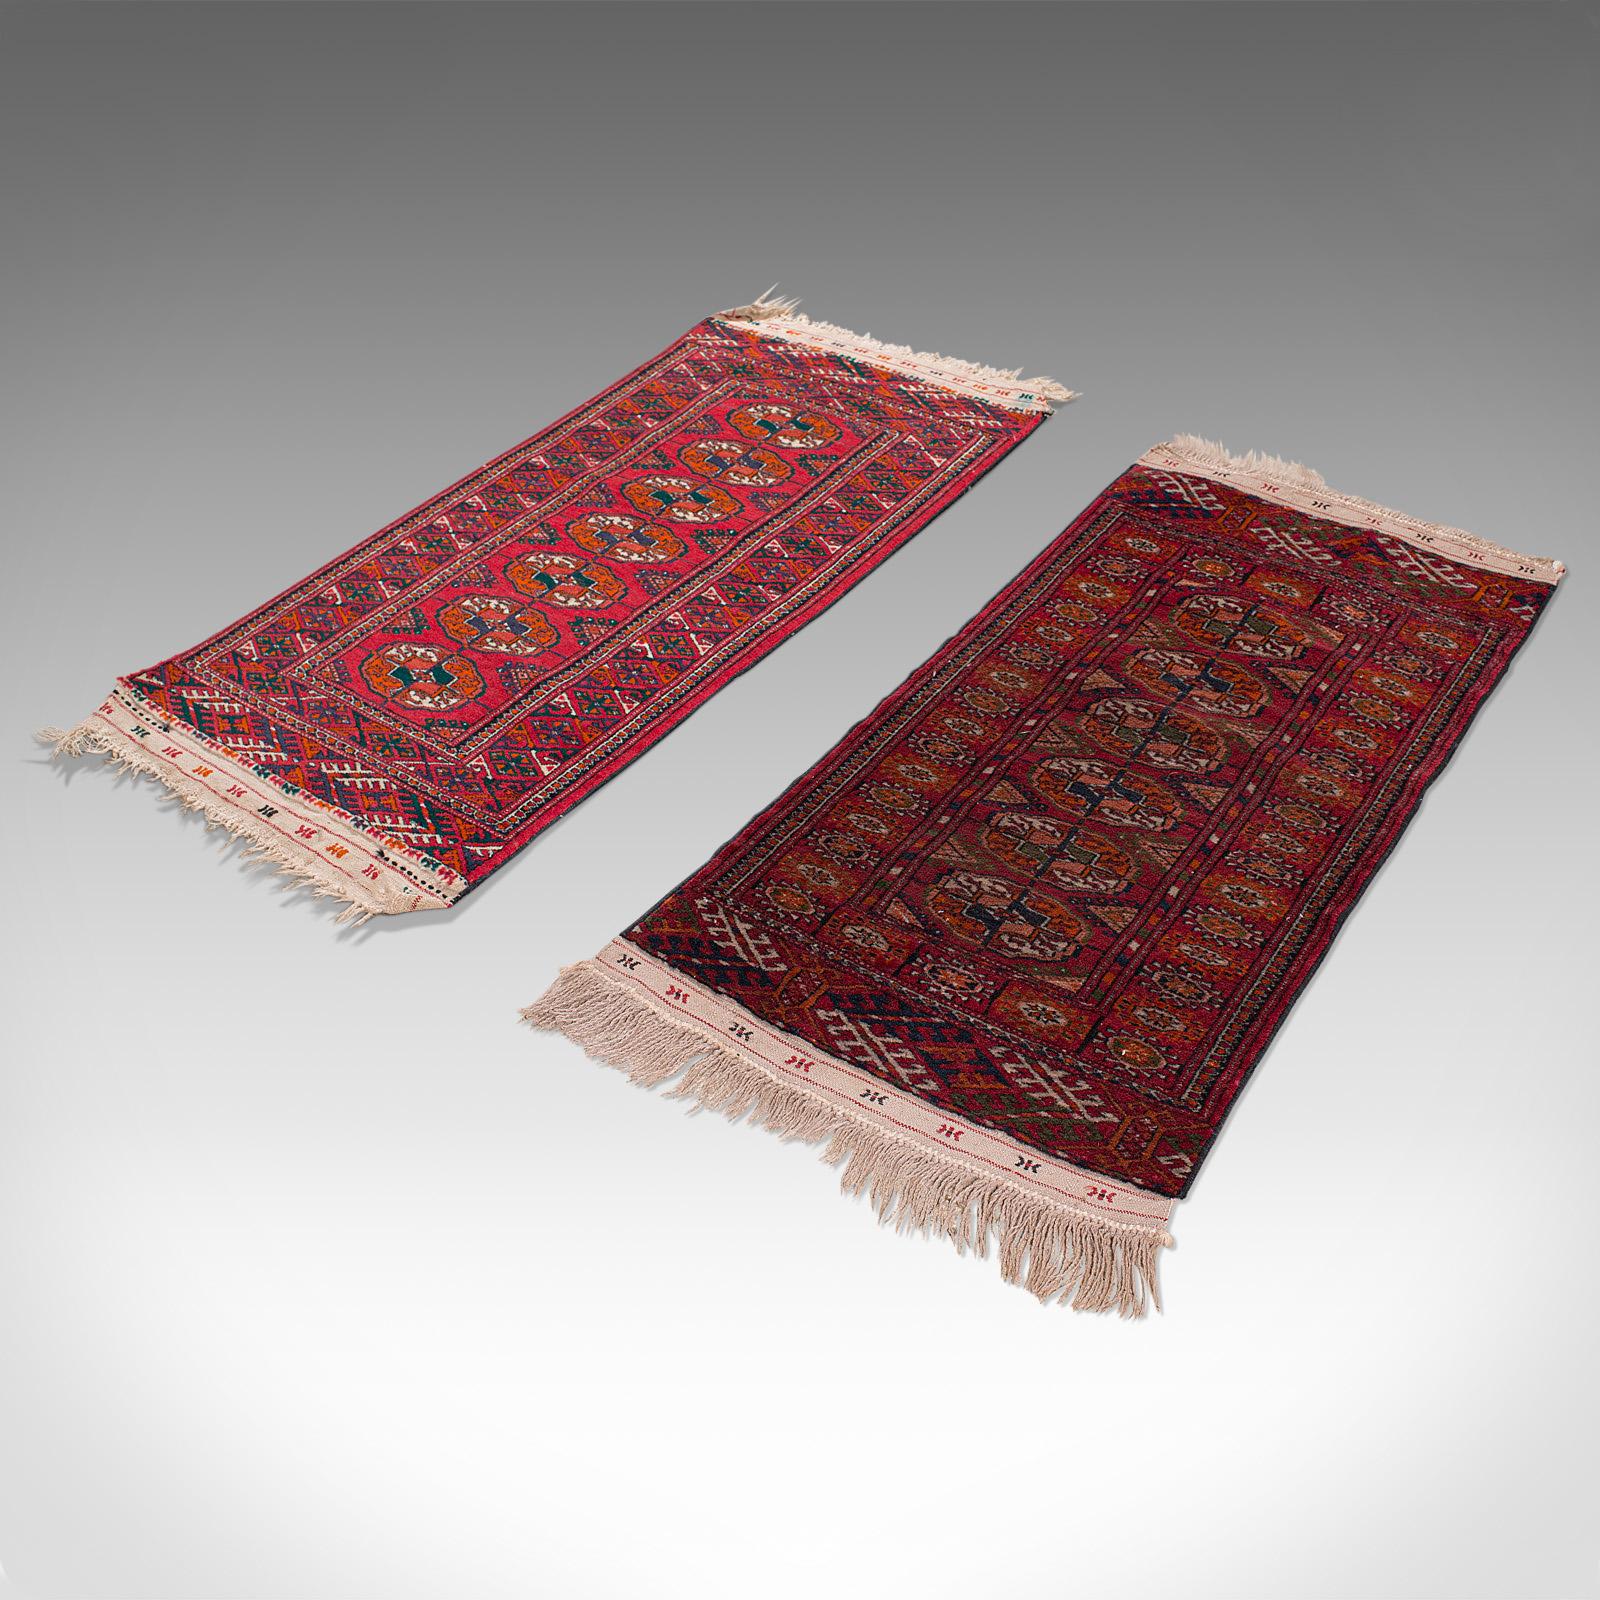 Antique Near Pair, Bokhara Rugs Turkoman Tekke Carpet, Wall Covering, circa 1910 In Good Condition For Sale In Hele, Devon, GB